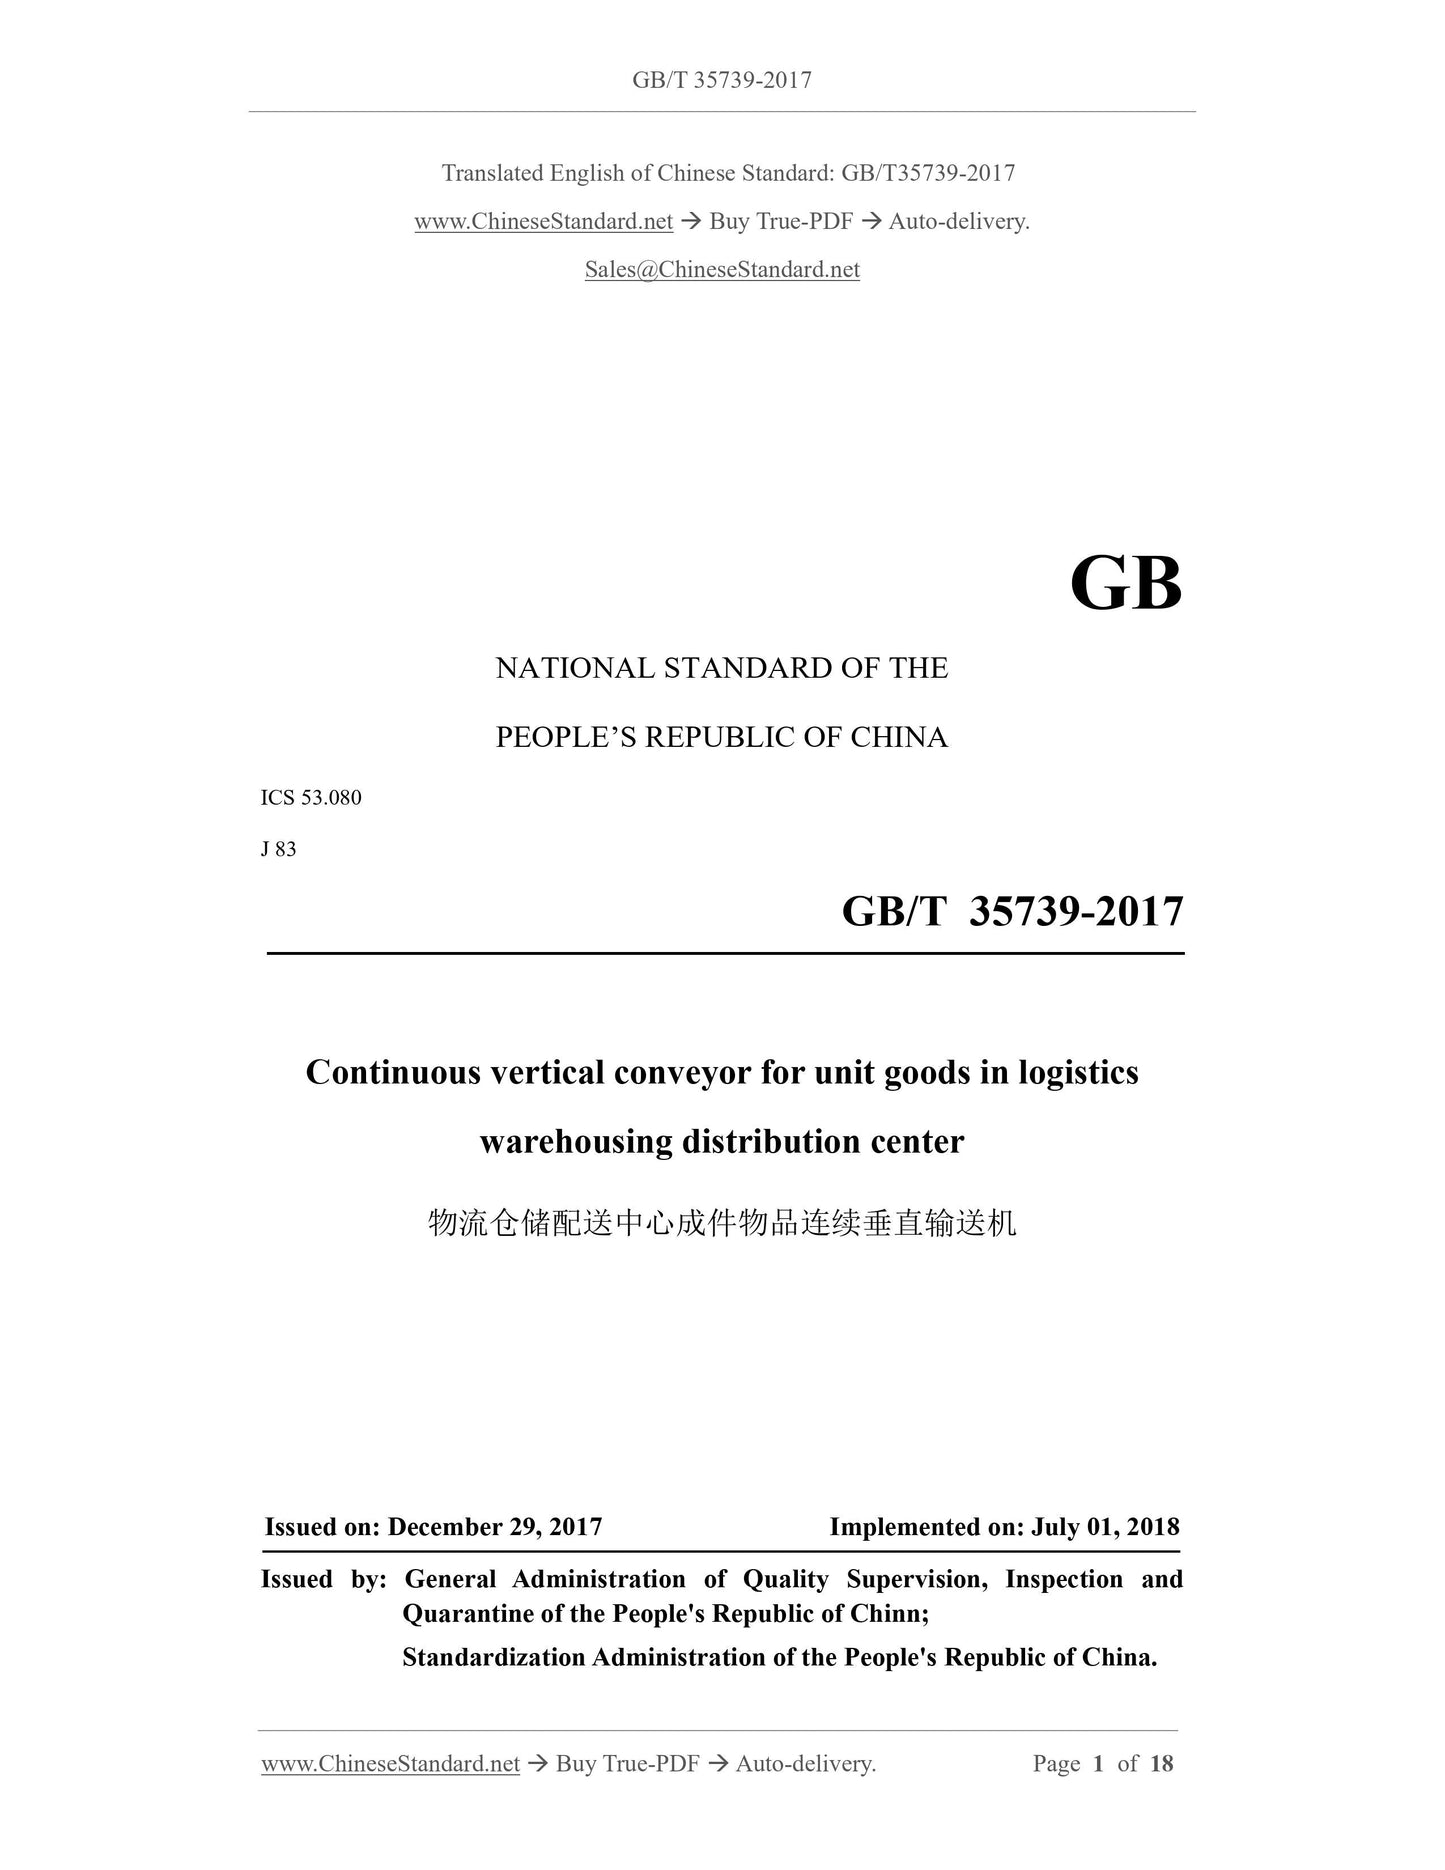 GB/T 35739-2017 Page 1